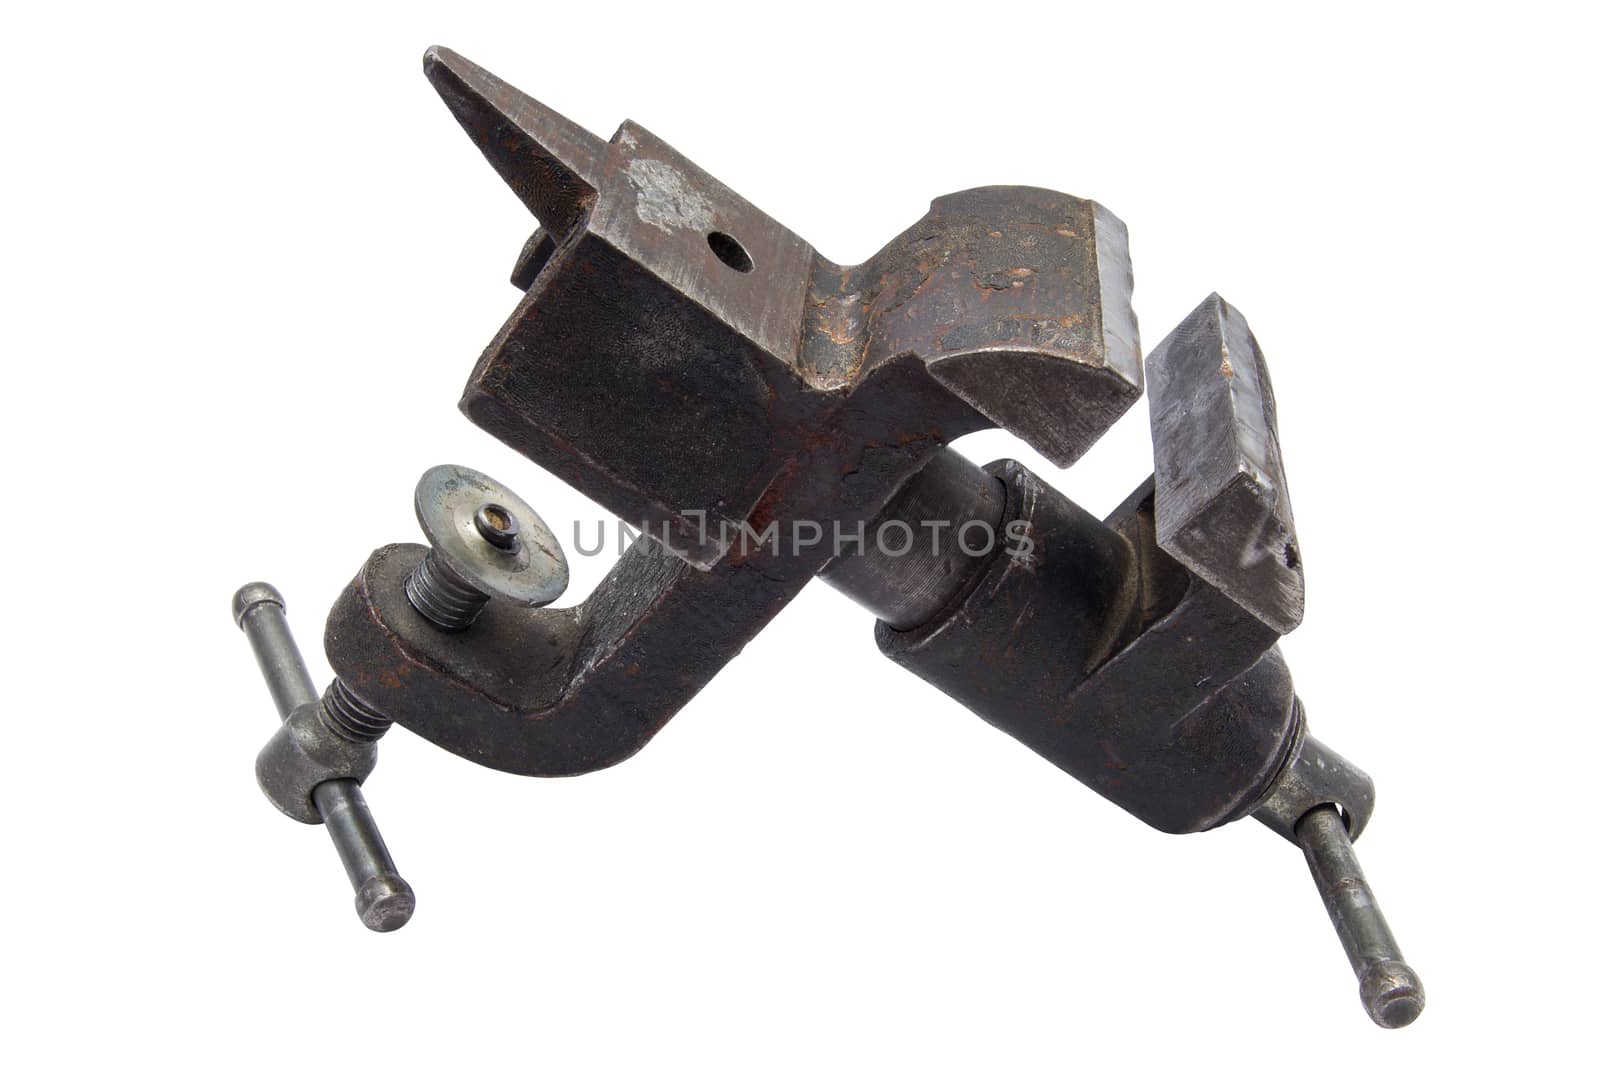 Old vise isolaed on white background by z1b